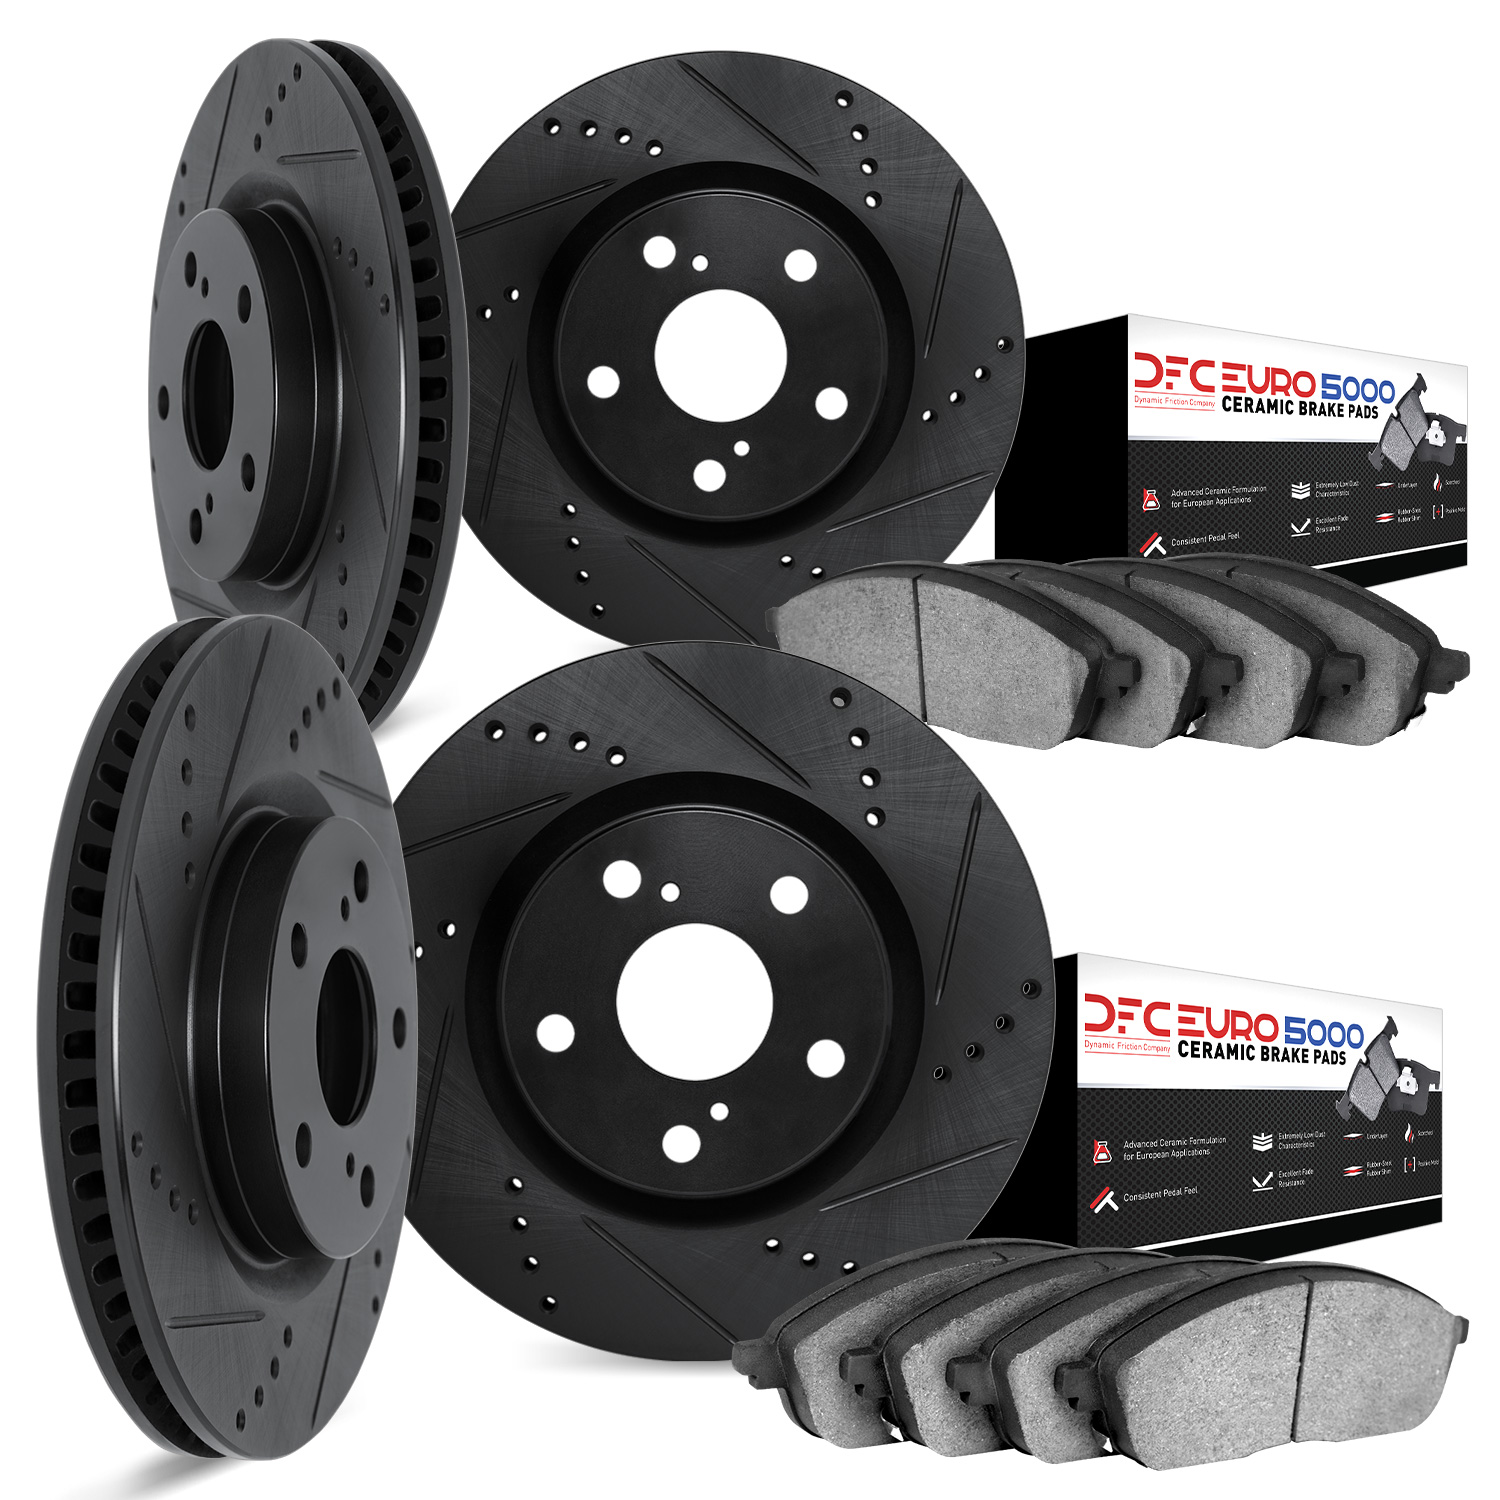 8604-31025 Drilled/Slotted Brake Rotors w/5000 Euro Ceramic Brake Pads Kit [Black], 2013-2020 BMW, Position: Front and Rear